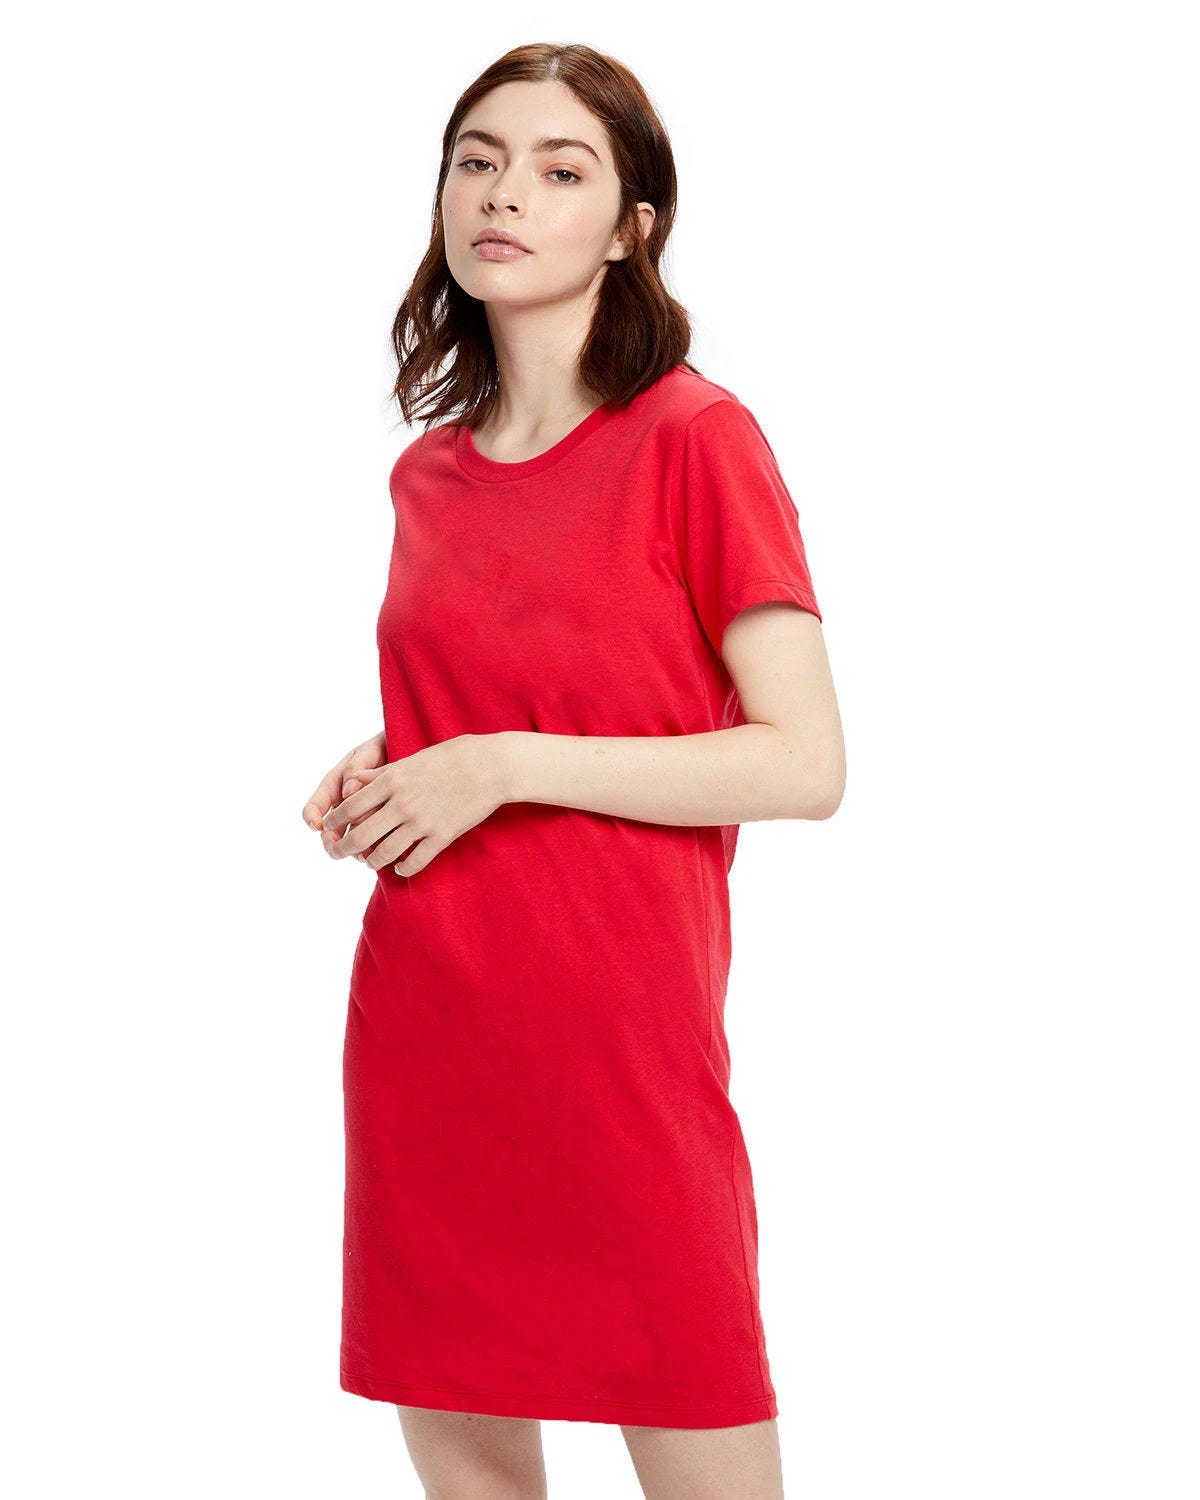 Red Combed Cotton T-Shirt Dress by US Blanks | Image